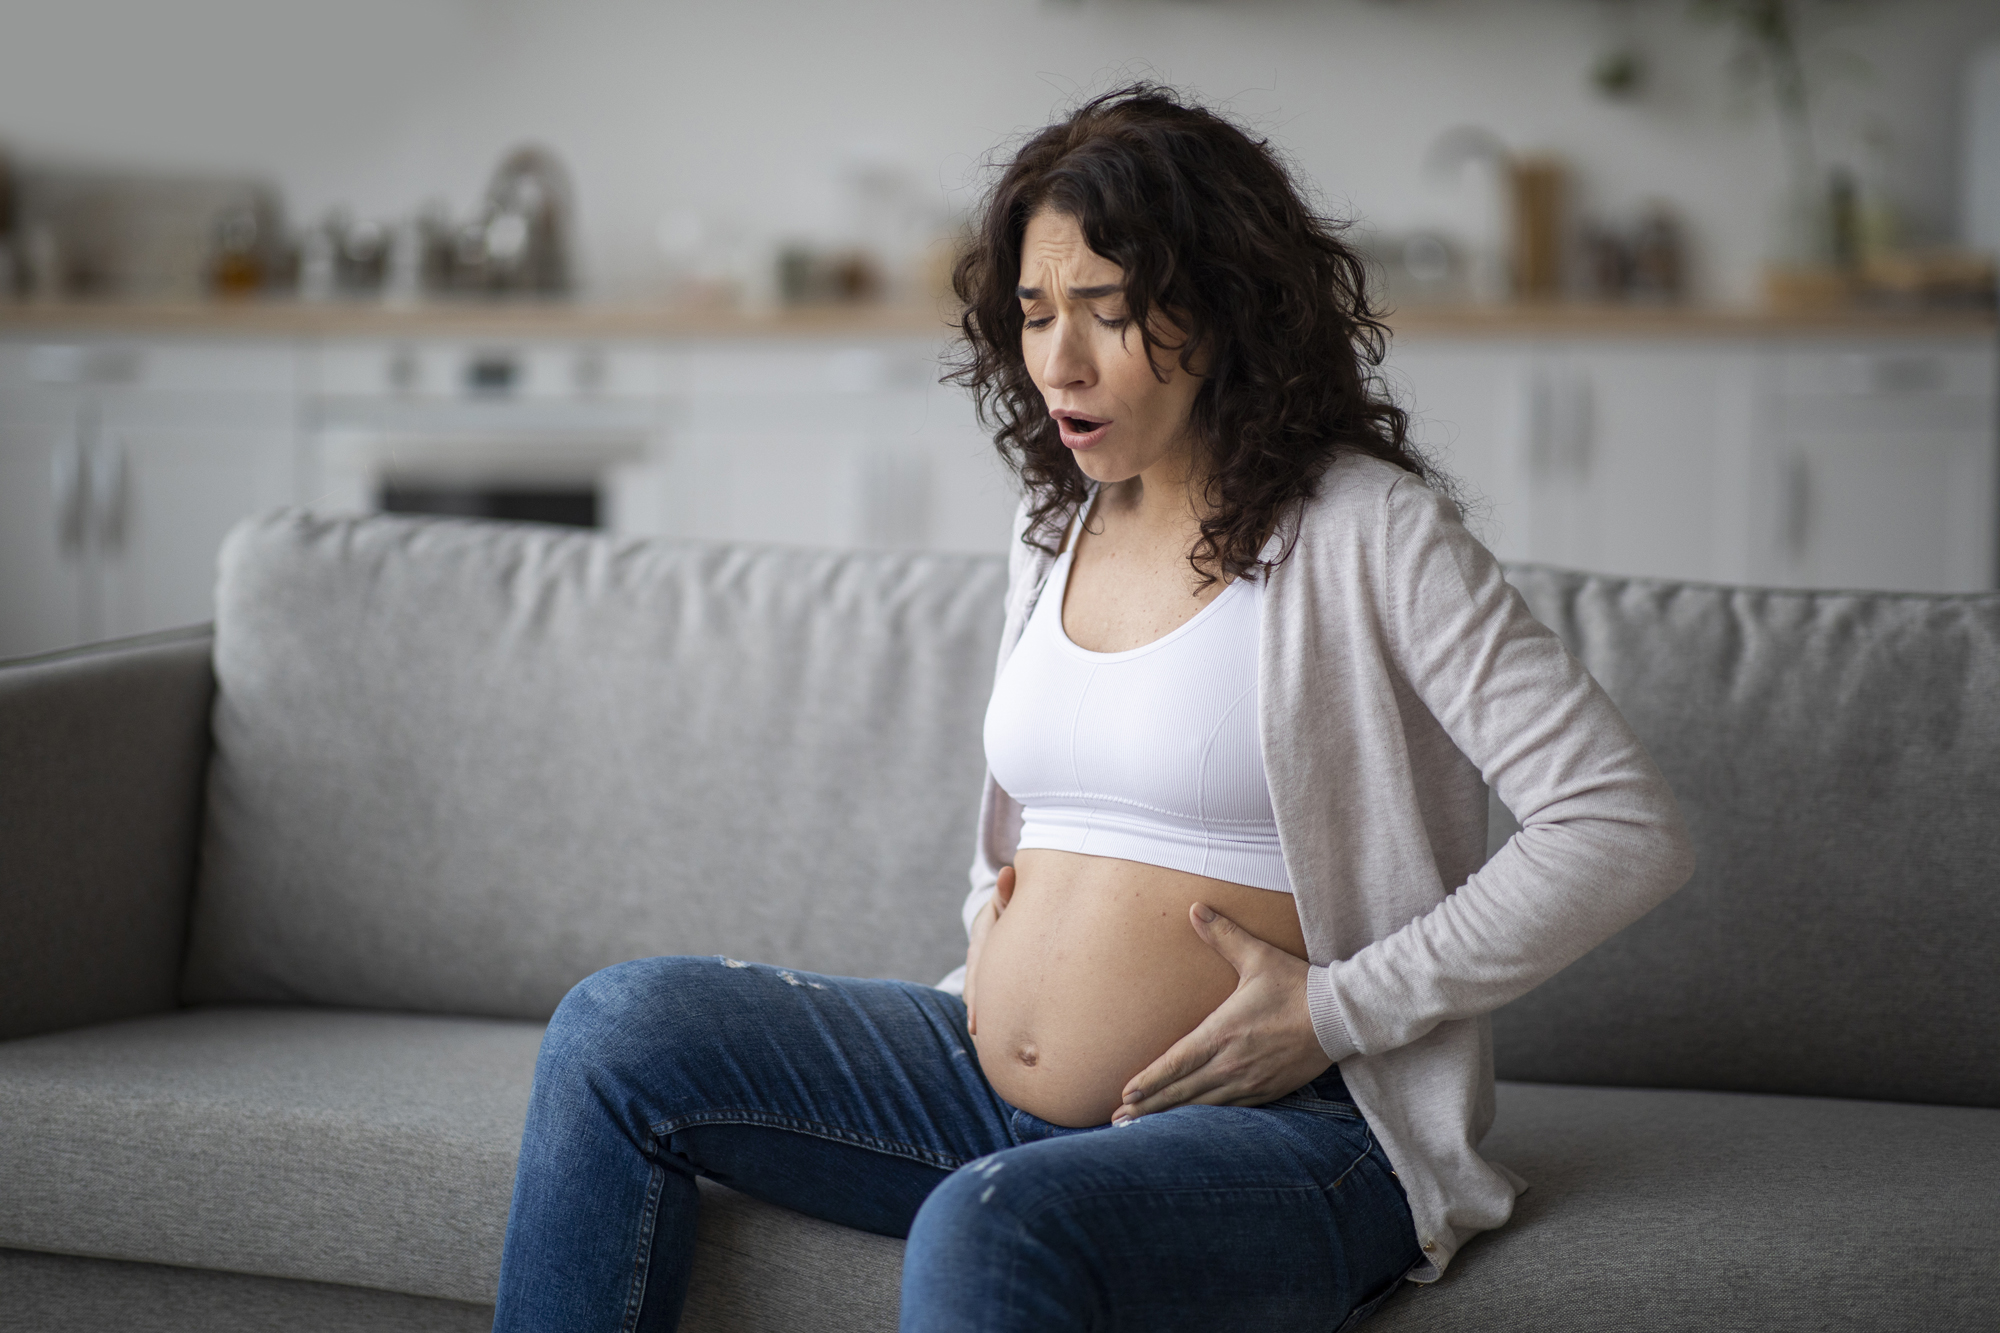 Braxton Hicks Contractions: What They Are and How to Recognize Them